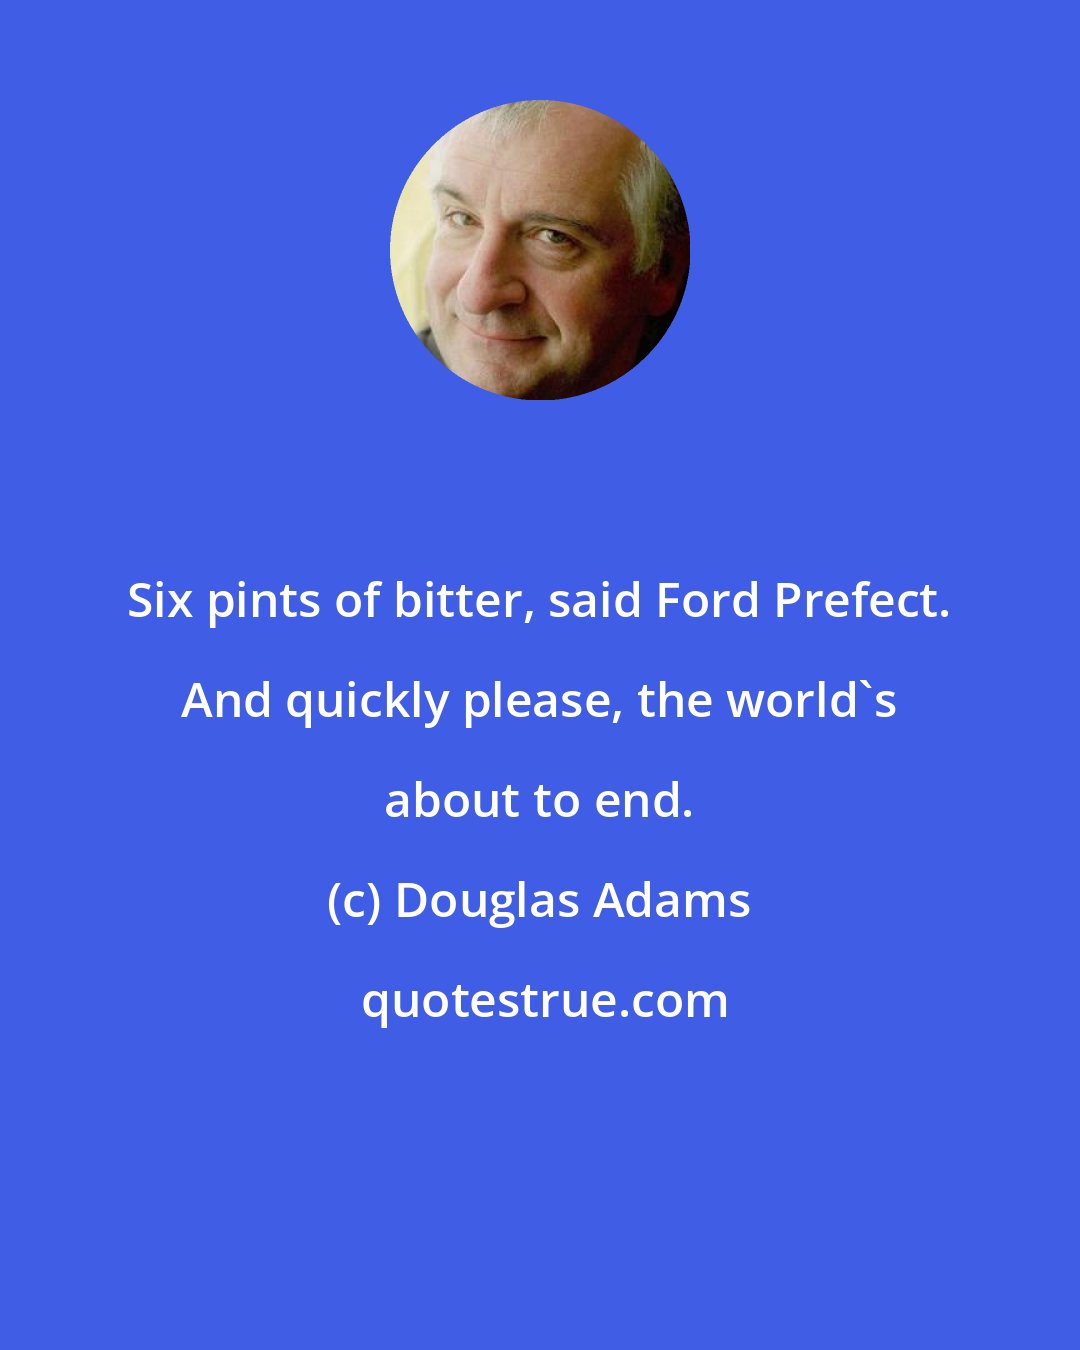 Douglas Adams: Six pints of bitter, said Ford Prefect. And quickly please, the world's about to end.